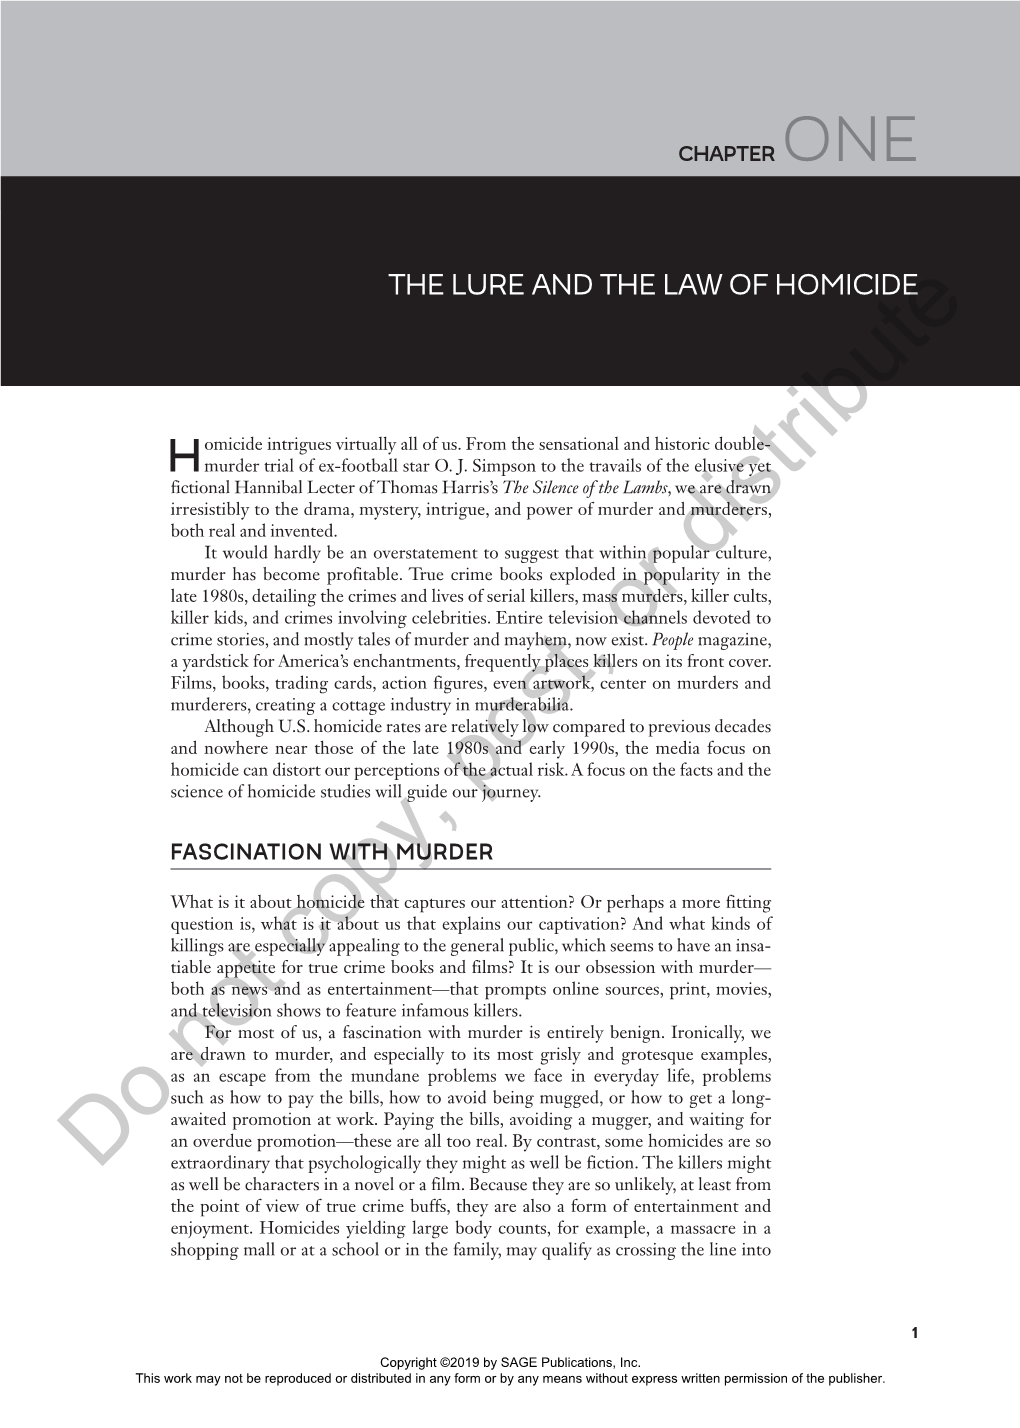 The Lure and the Law of Homicide